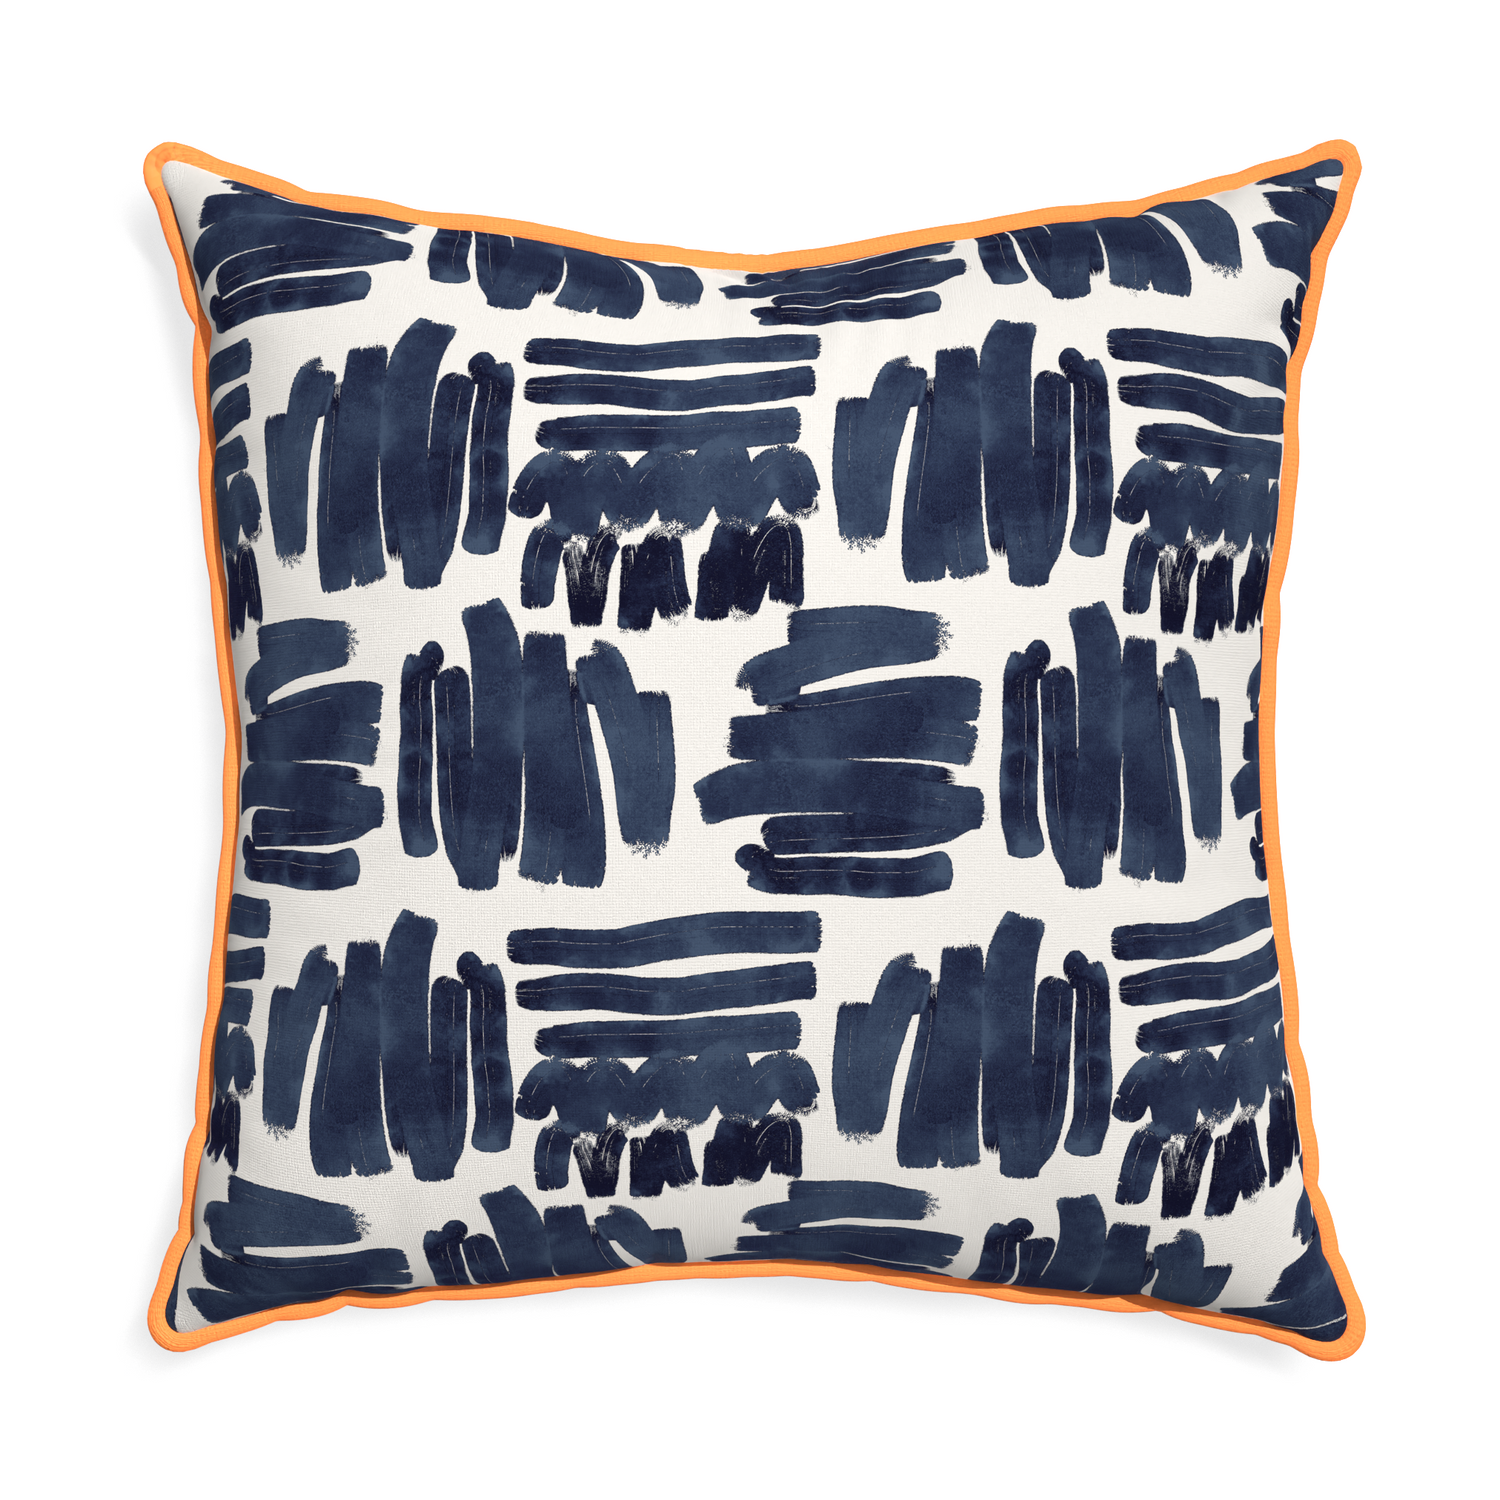 Euro-sham warby custom pillow with clementine piping on white background